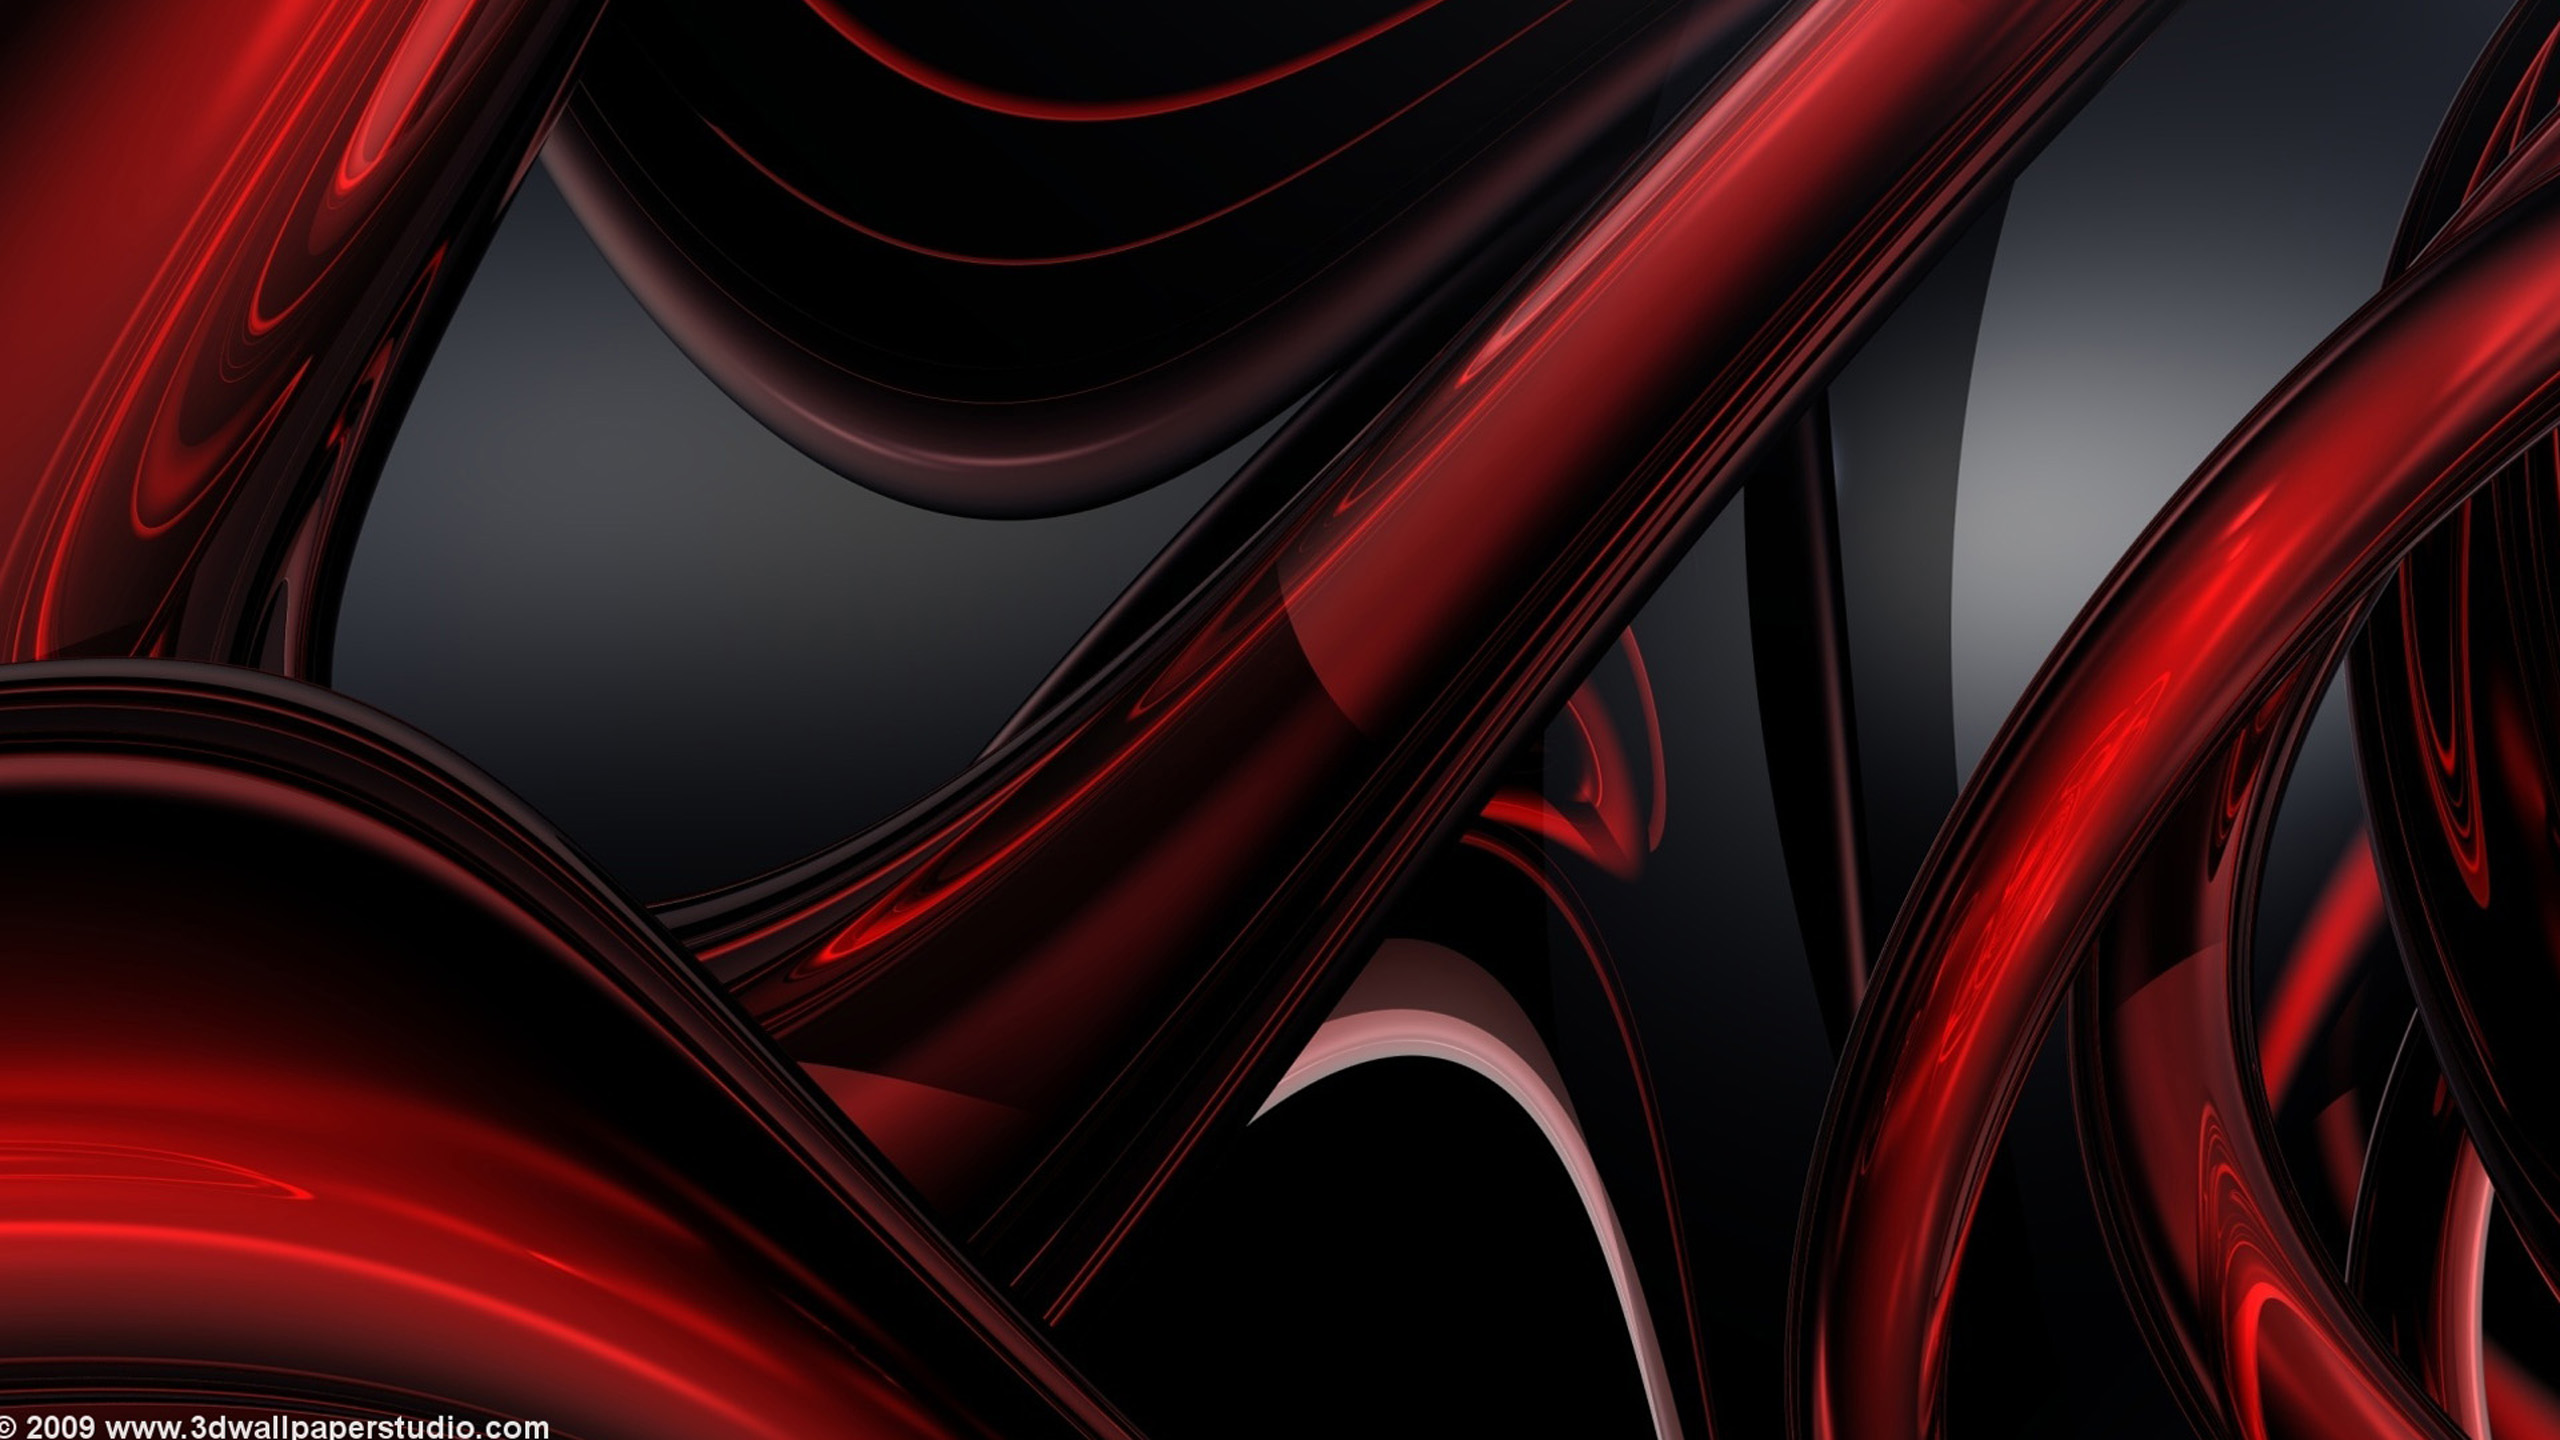 Red And Black Abstract Wallpaper HDq Cover